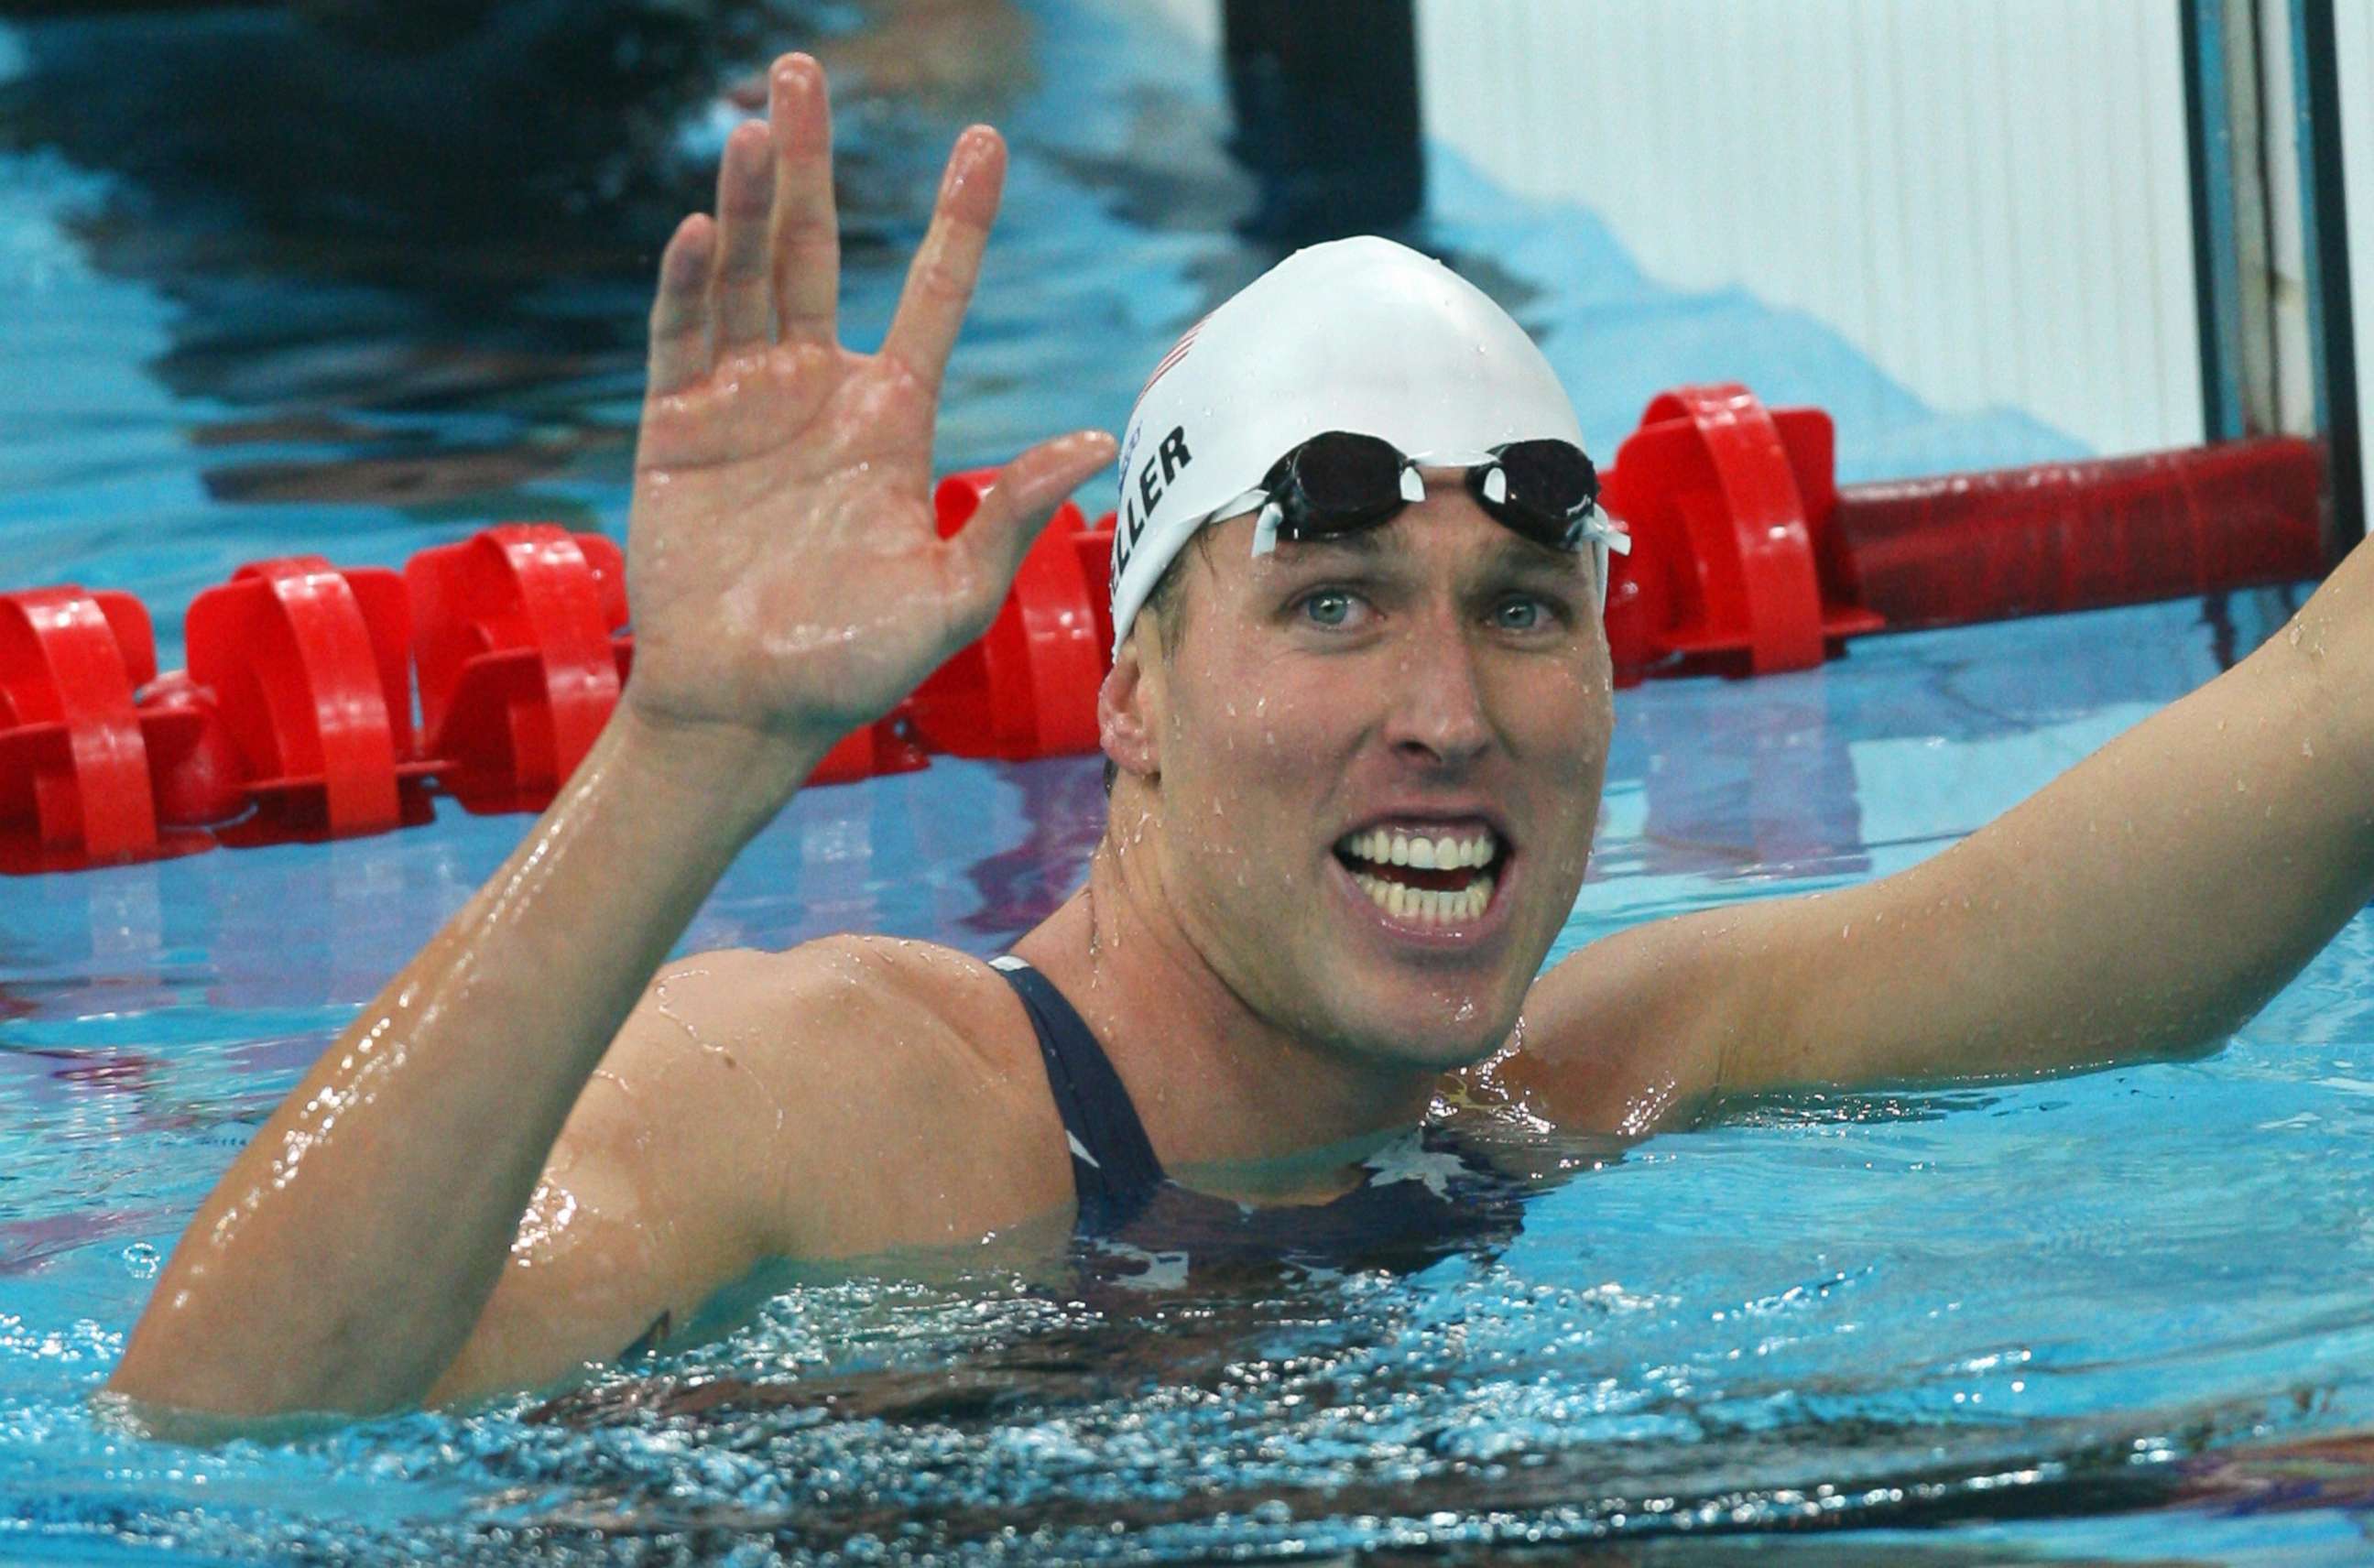 PHOTO: Klete Keller smiles after winning the men's 4 x 200m freestyle relay swimming heat at the National Aquatics Center in the 2008 Beijing Olympic Games on Aug. 12, 2008.